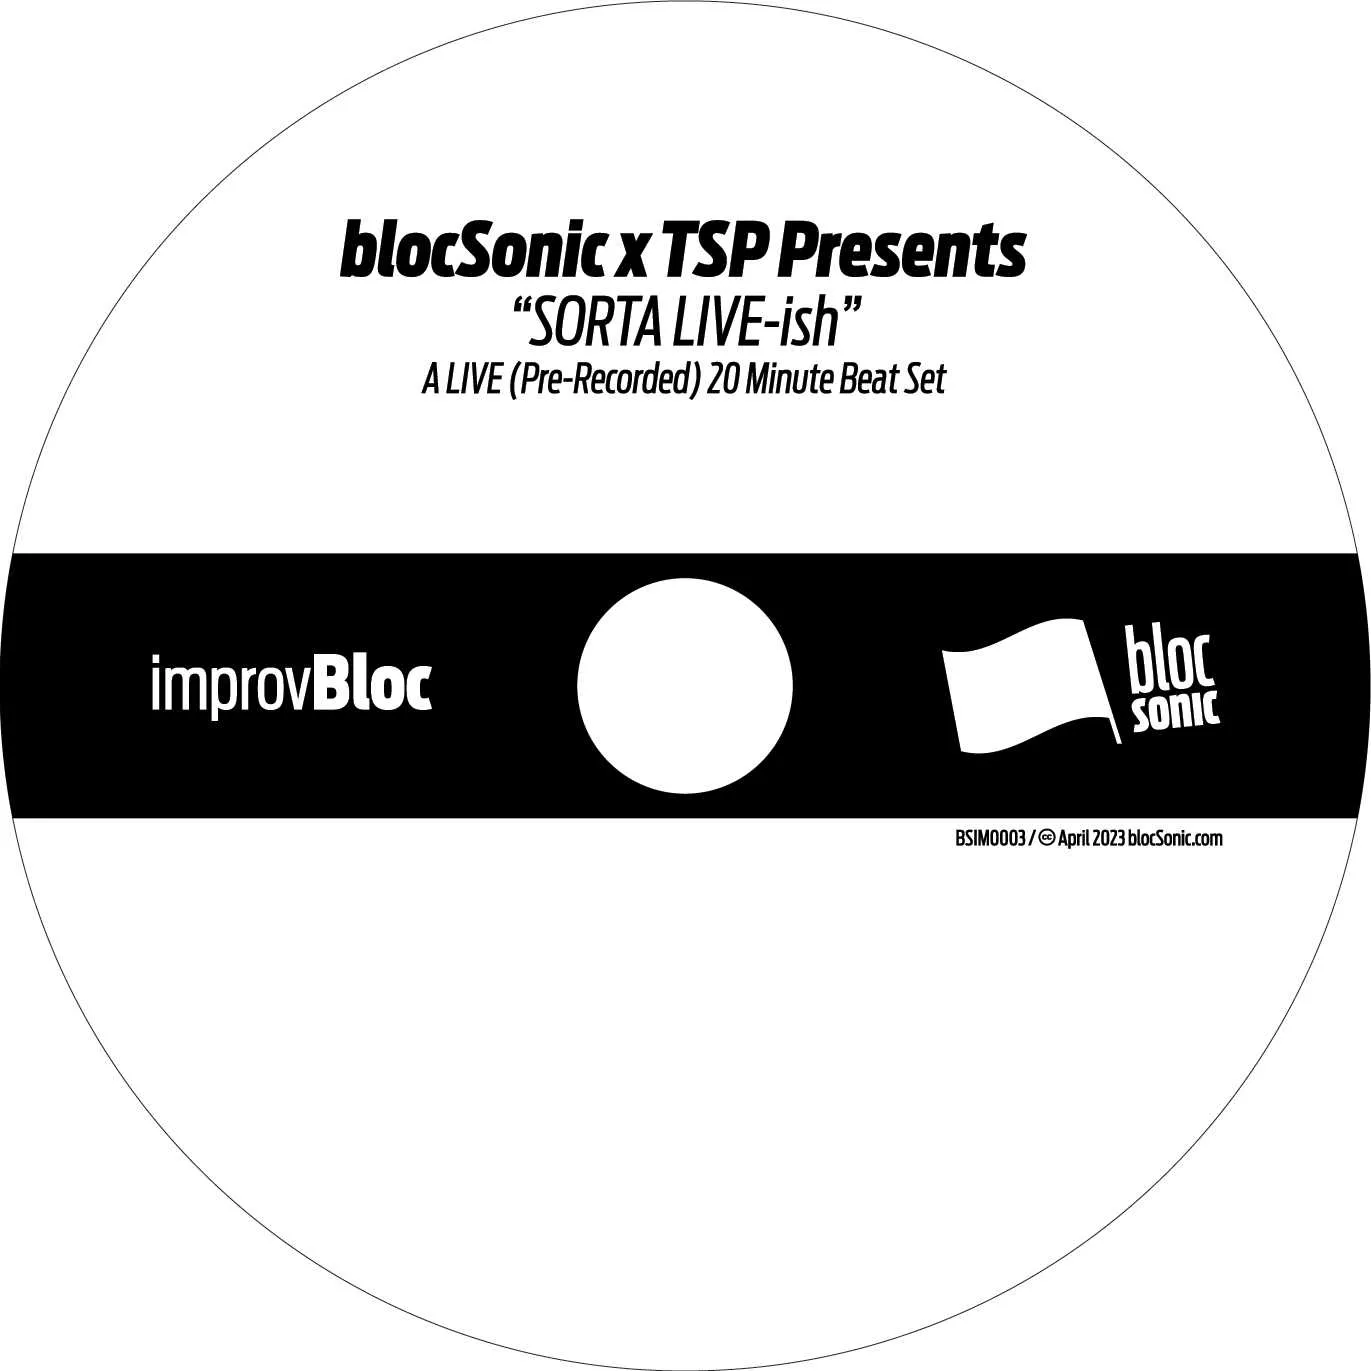 Album disc for “blocSonic x TSP Presents “SORTA LIVE-ish” A LIVE (Pre-Recorded) 20 Minute Beat Set” by Tha Silent Partner